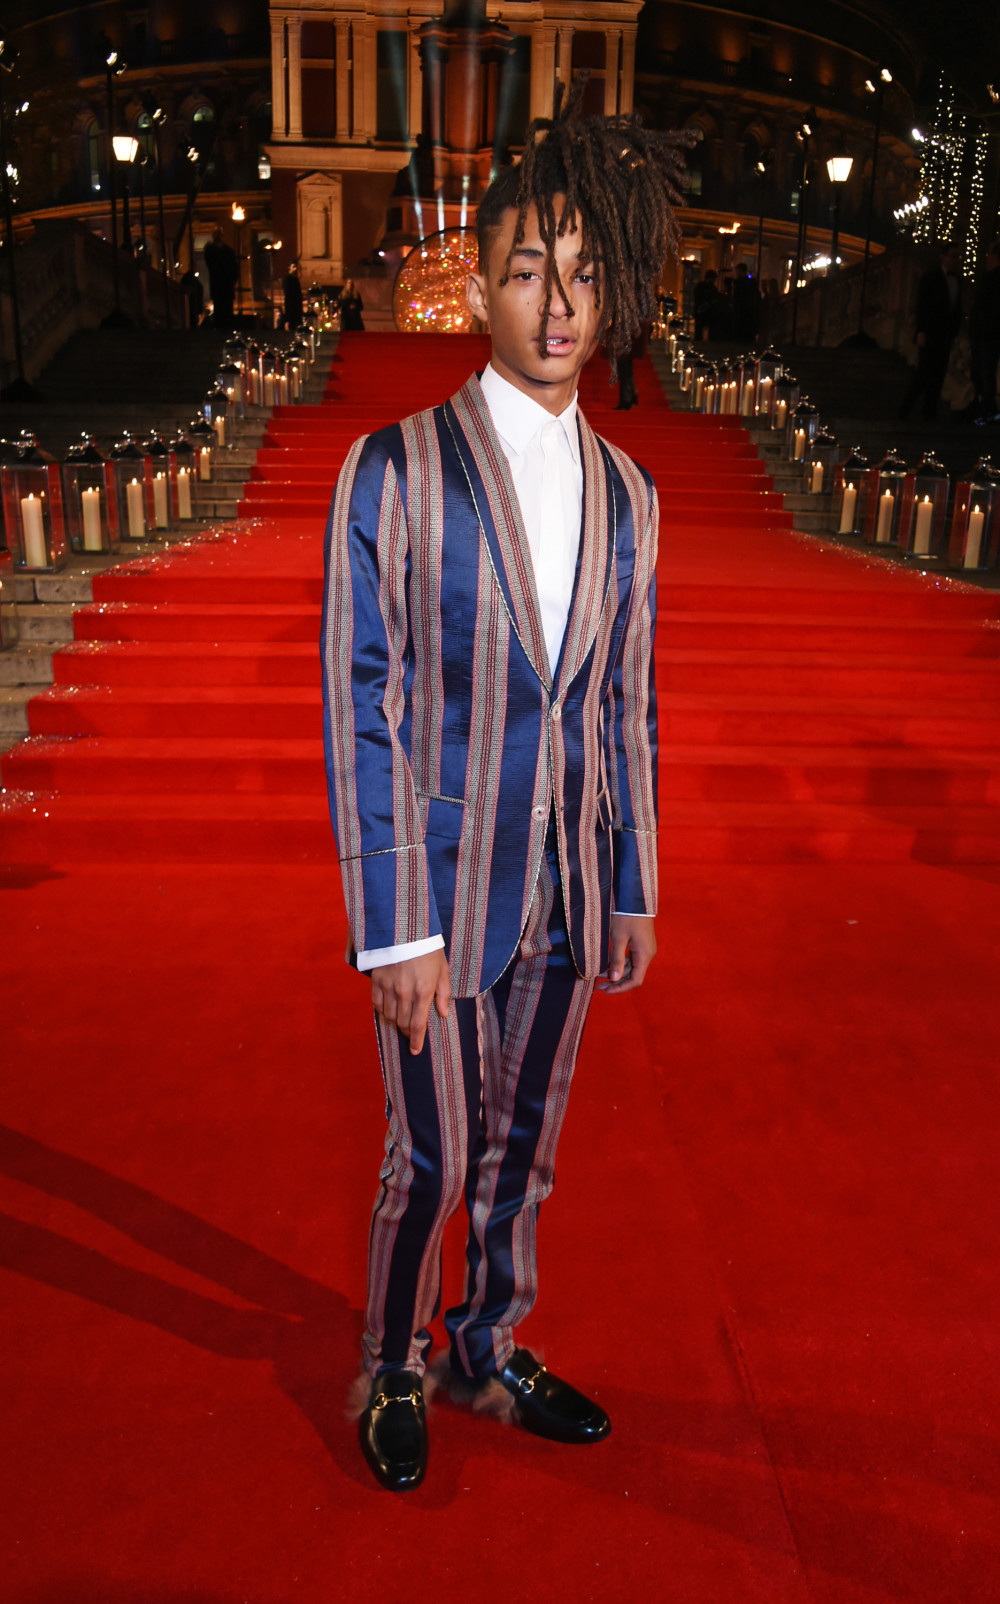 LONDON, ENGLAND - DECEMBER 05: Jaden Smith attends The Fashion Awards 2016 at Royal Albert Hall on December 5, 2016 in London, United Kingdom. (Photo by David M. Benett/Dave Benett/Getty Images)